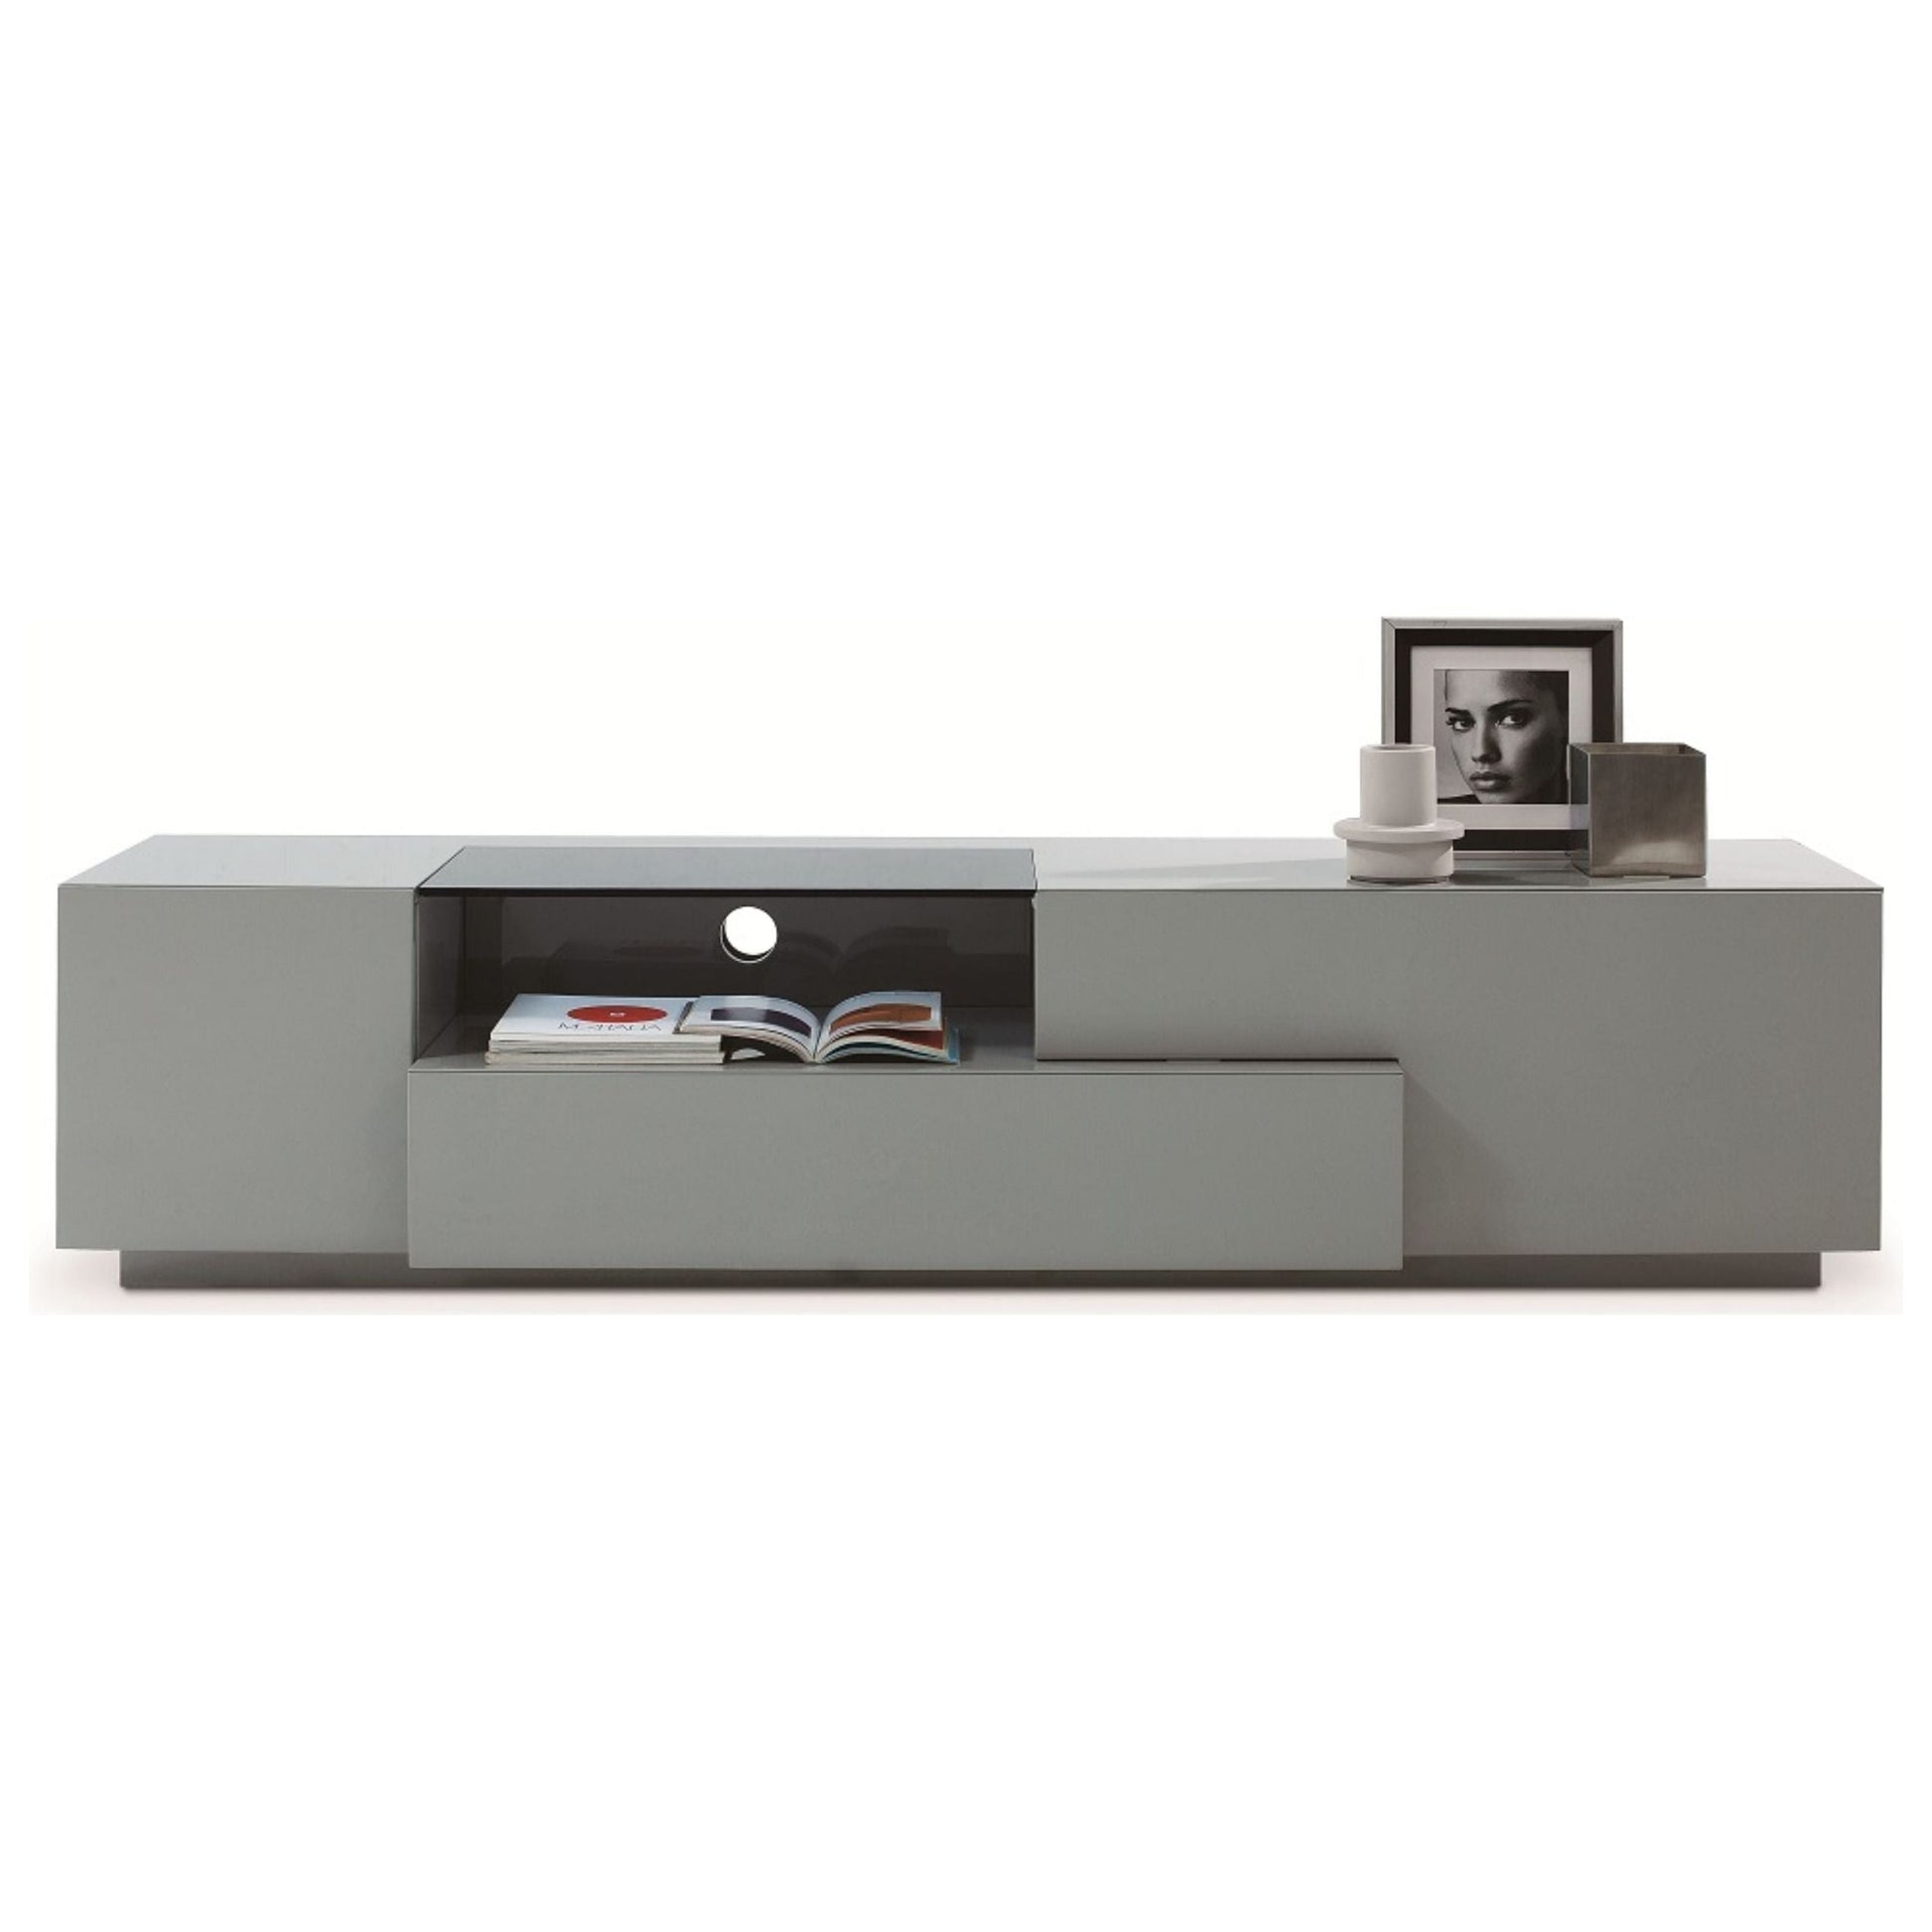 TV Stand 015 in Grey High Gloss jnmfurniture TV Stands & Media 17873